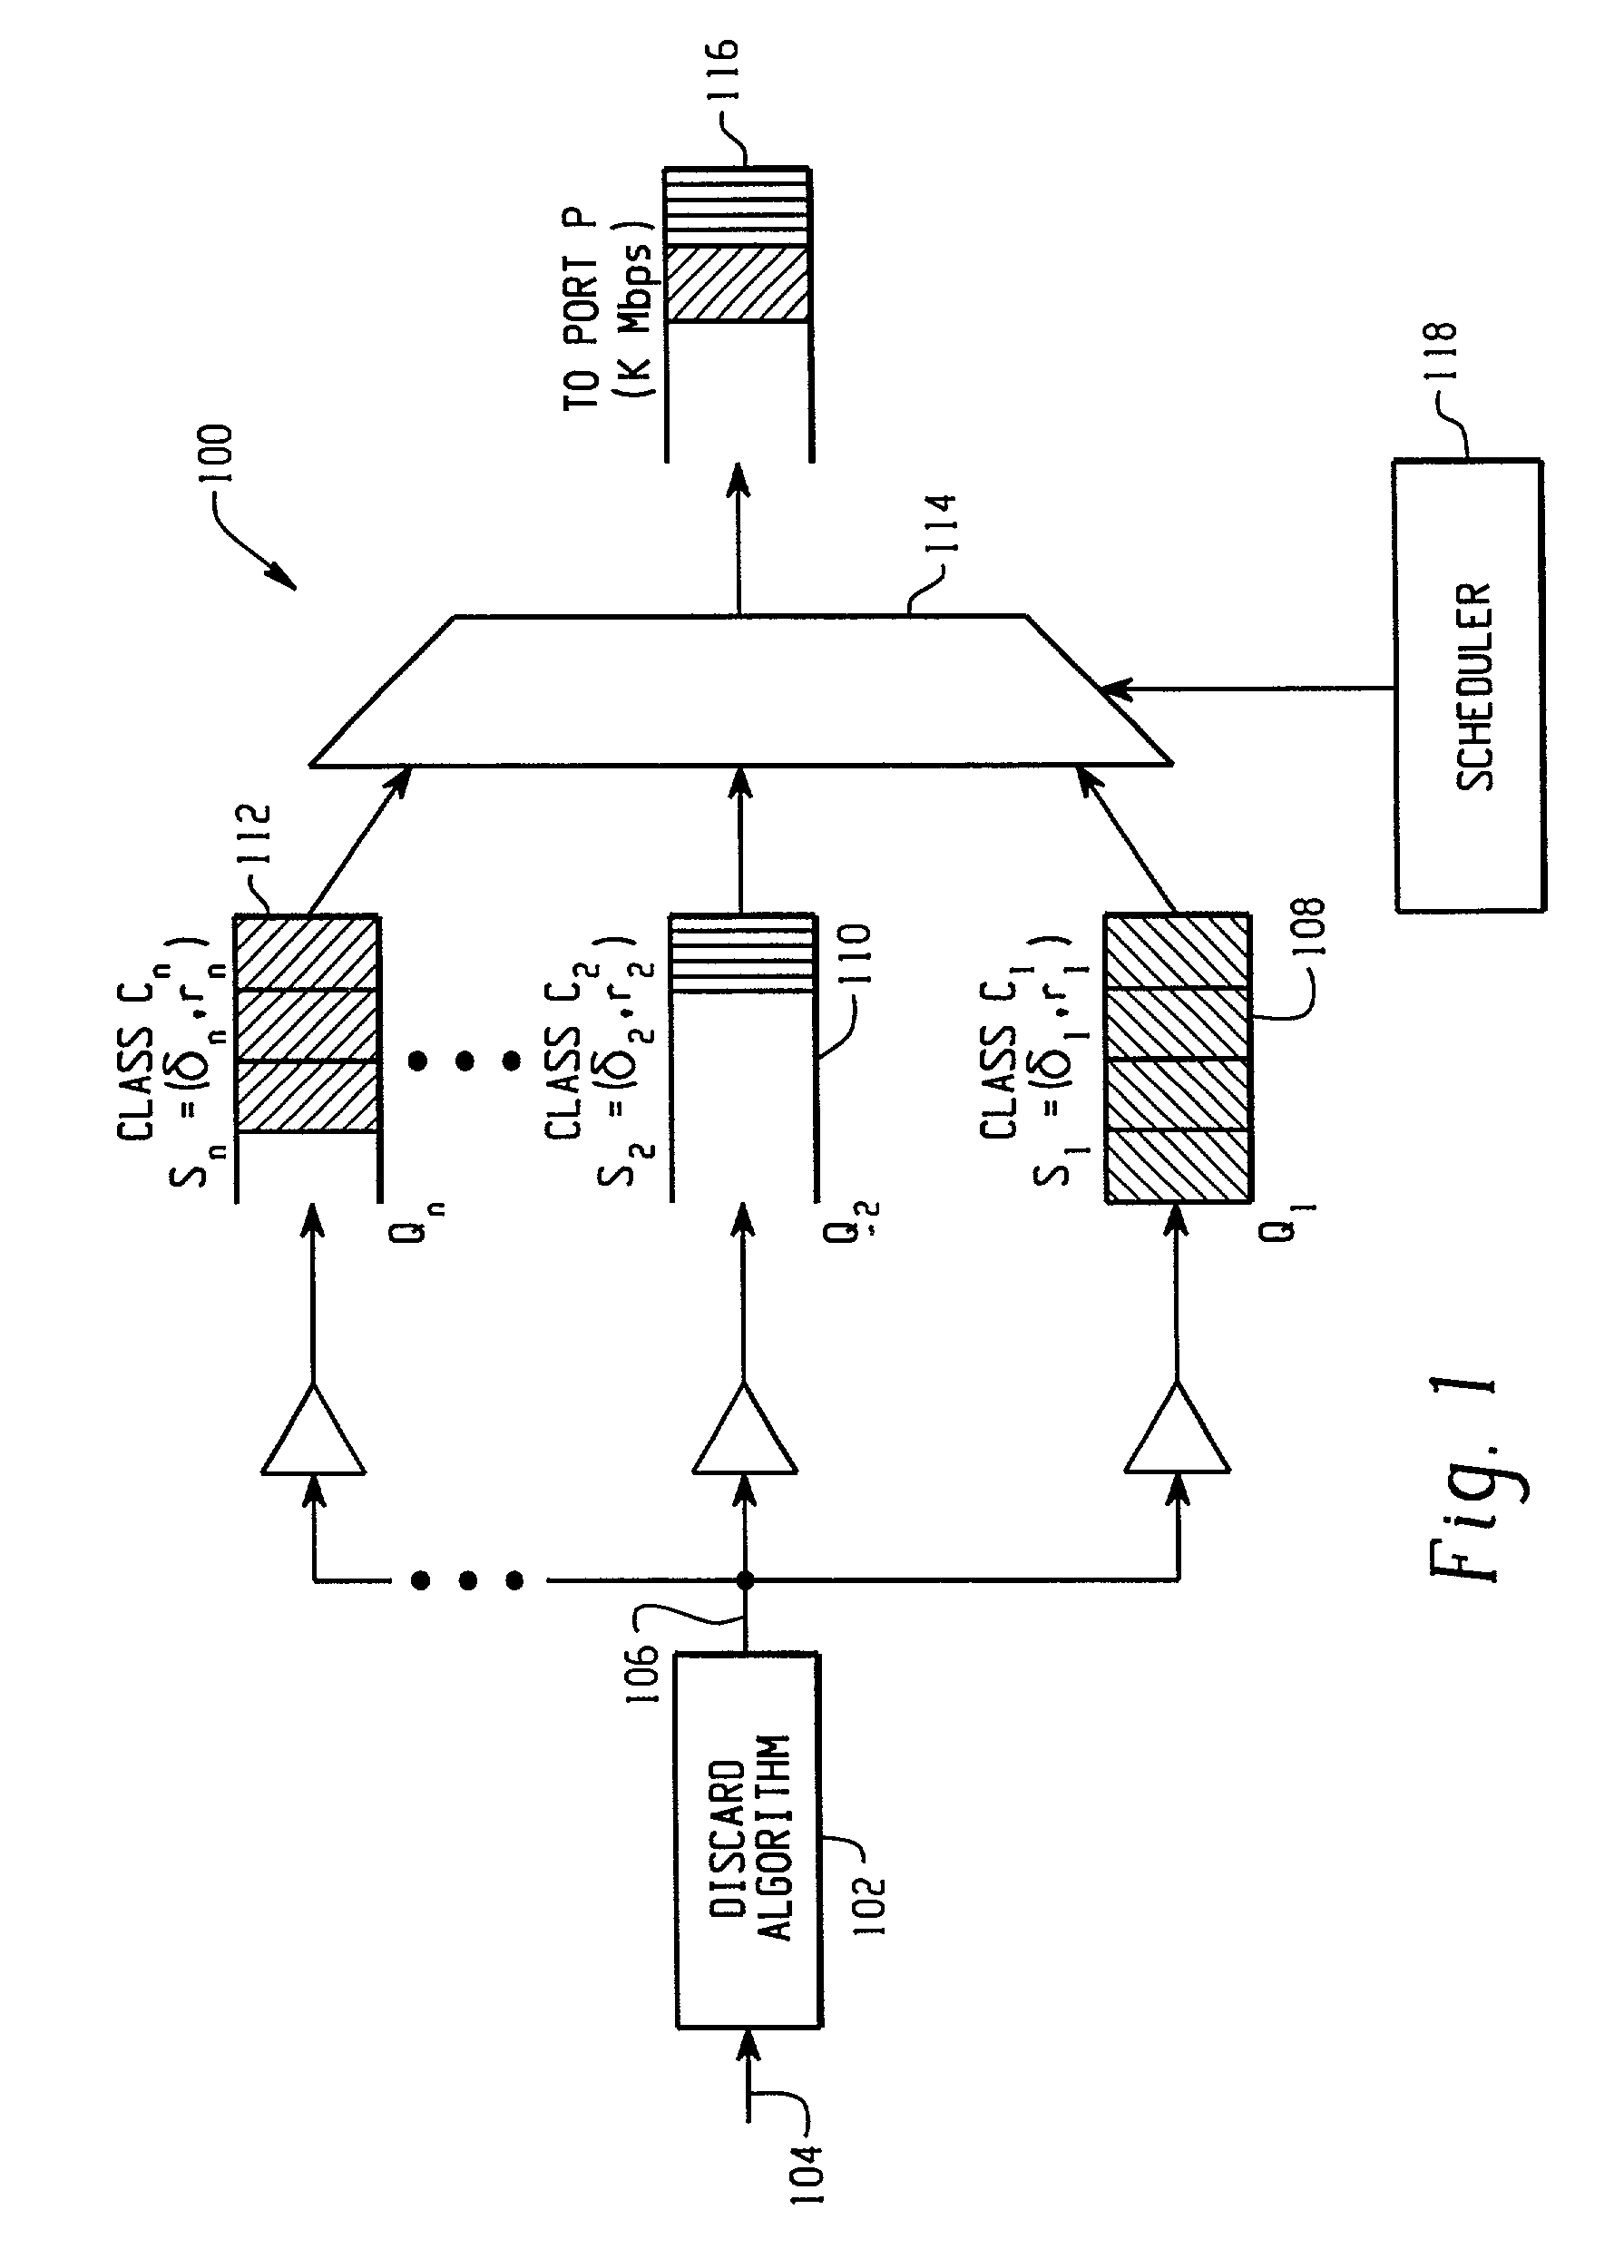 Unified algorithm for frame scheduling and buffer management in differentiated services networks